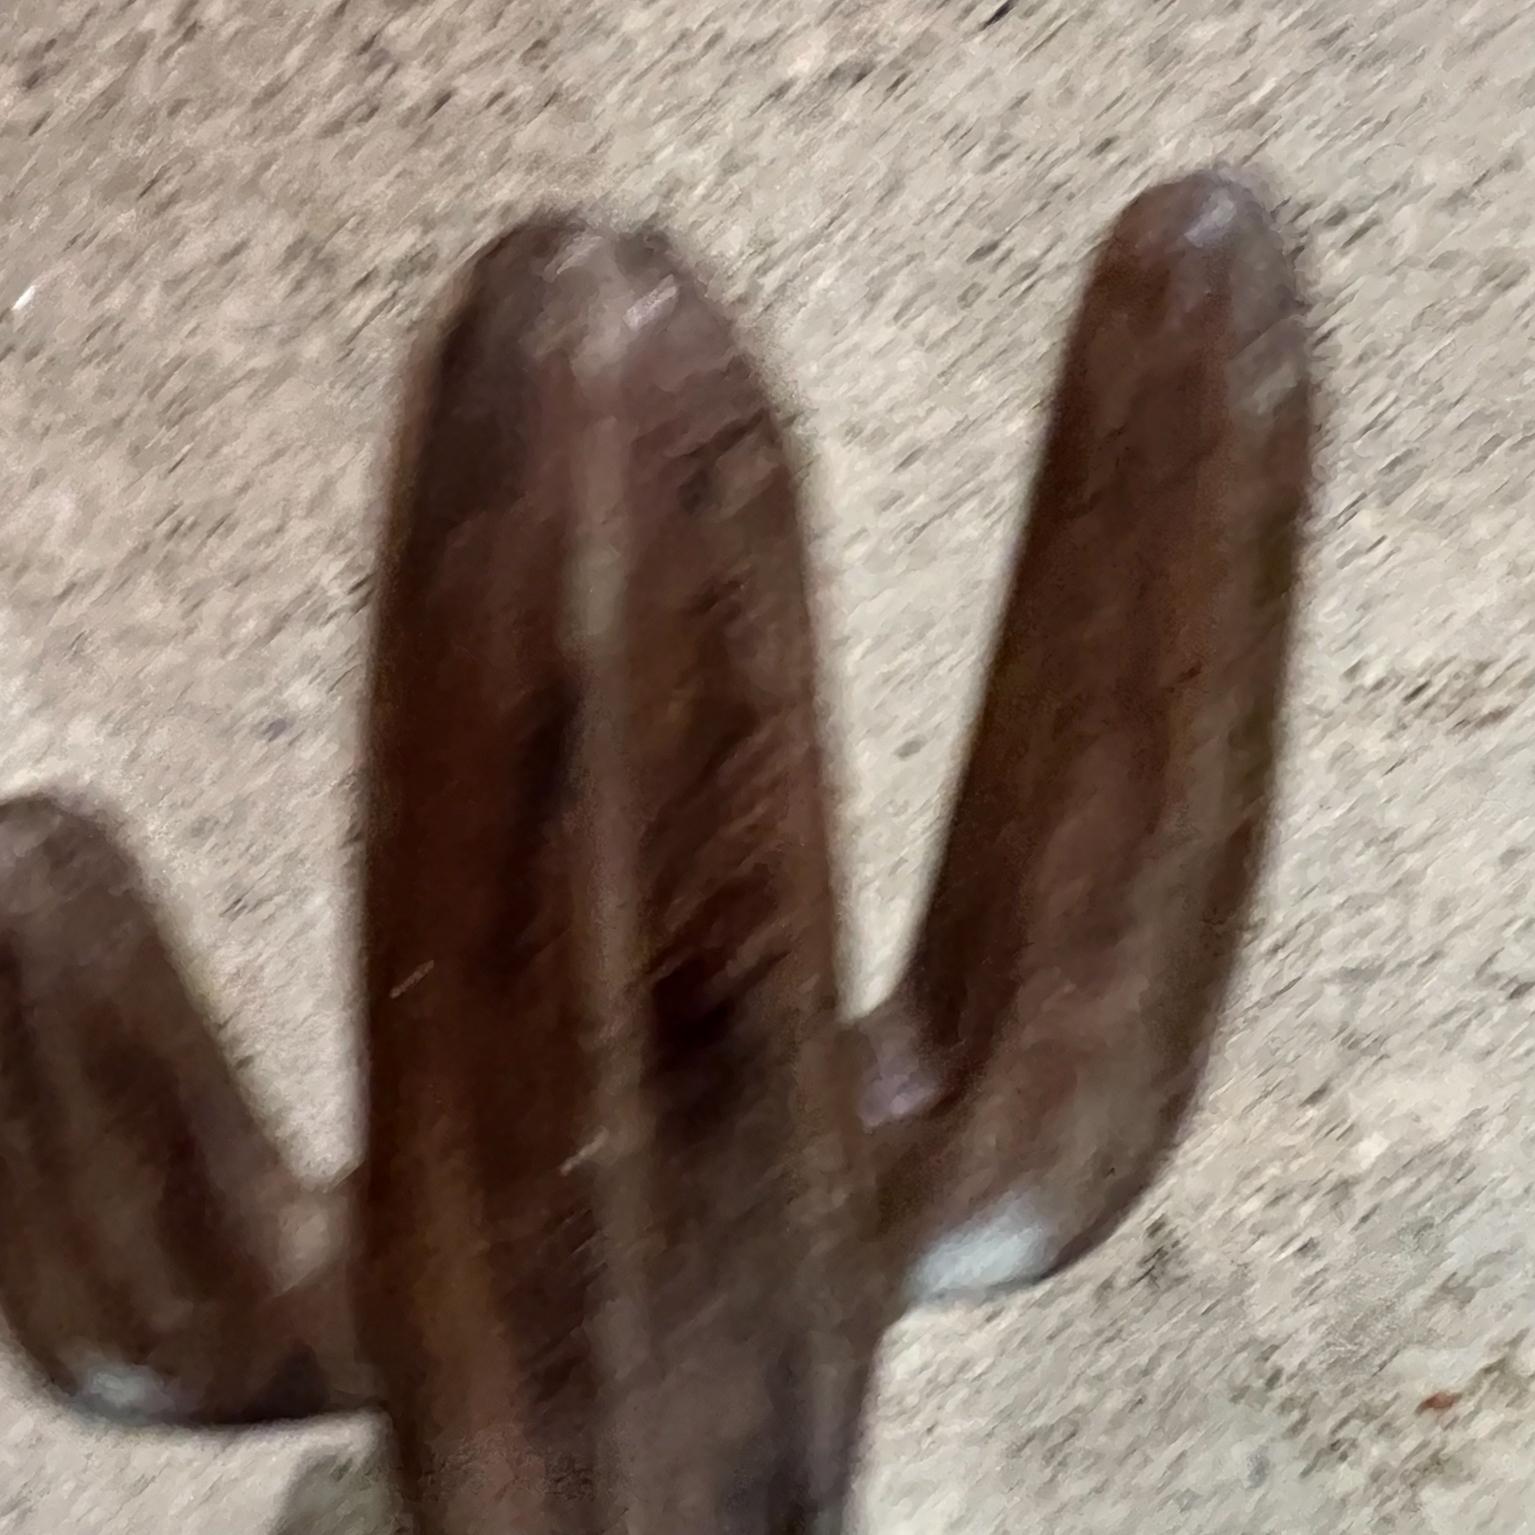 Mexican 1970s Saguaro Cactus Tree Sculpture Exquisite Hand Carved Wood Mexico